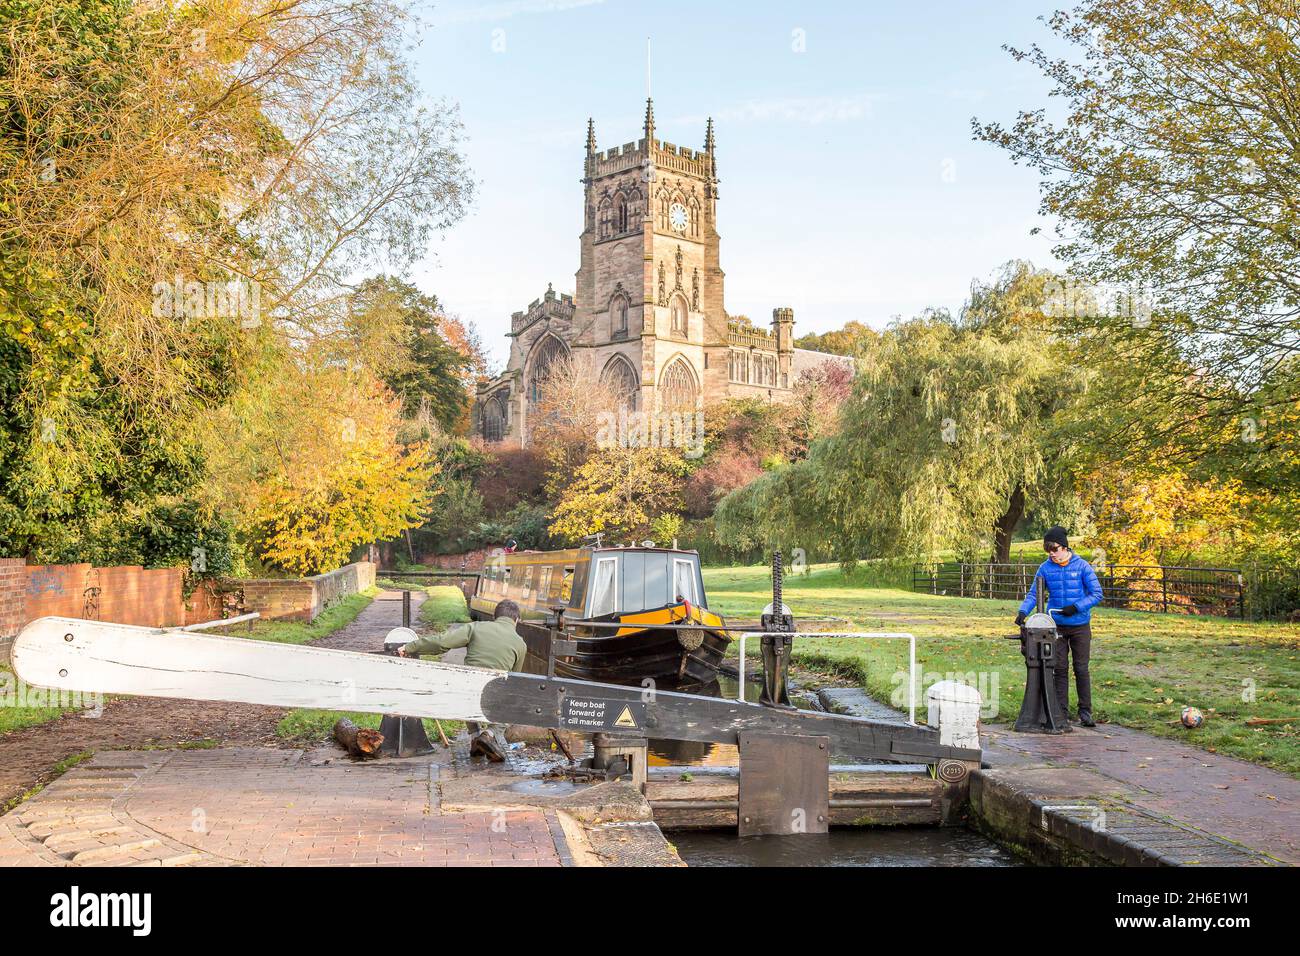 Narrowboat on the canal waterways approaching Kiddermister lock in summer with St Mary's church behind, Worcestershire, UK. Stock Photo